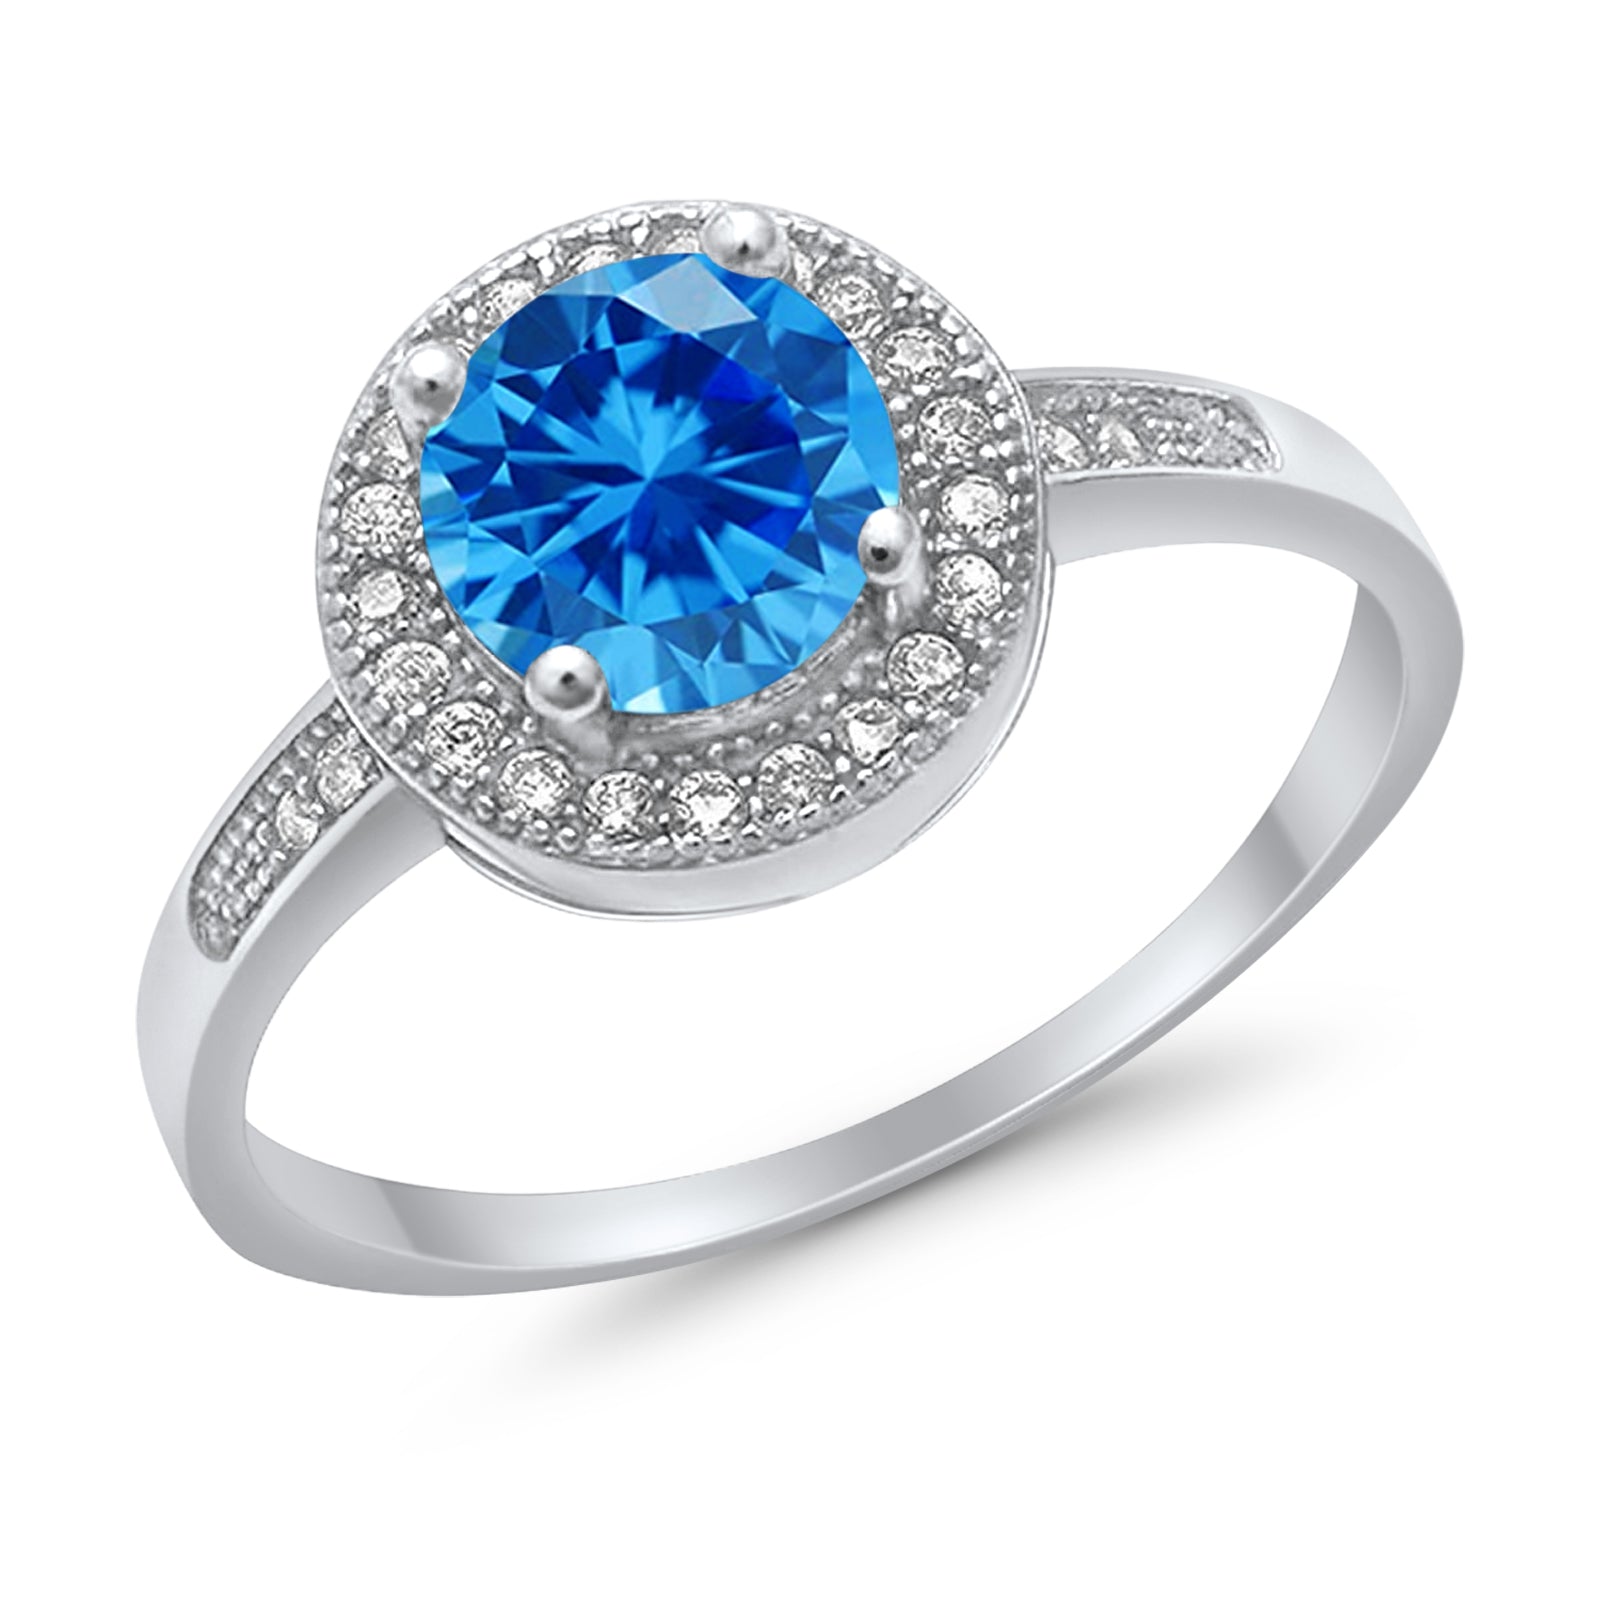 Halo Wedding Ring Round Simulated Blue Topaz CZ 925 Sterling Silver